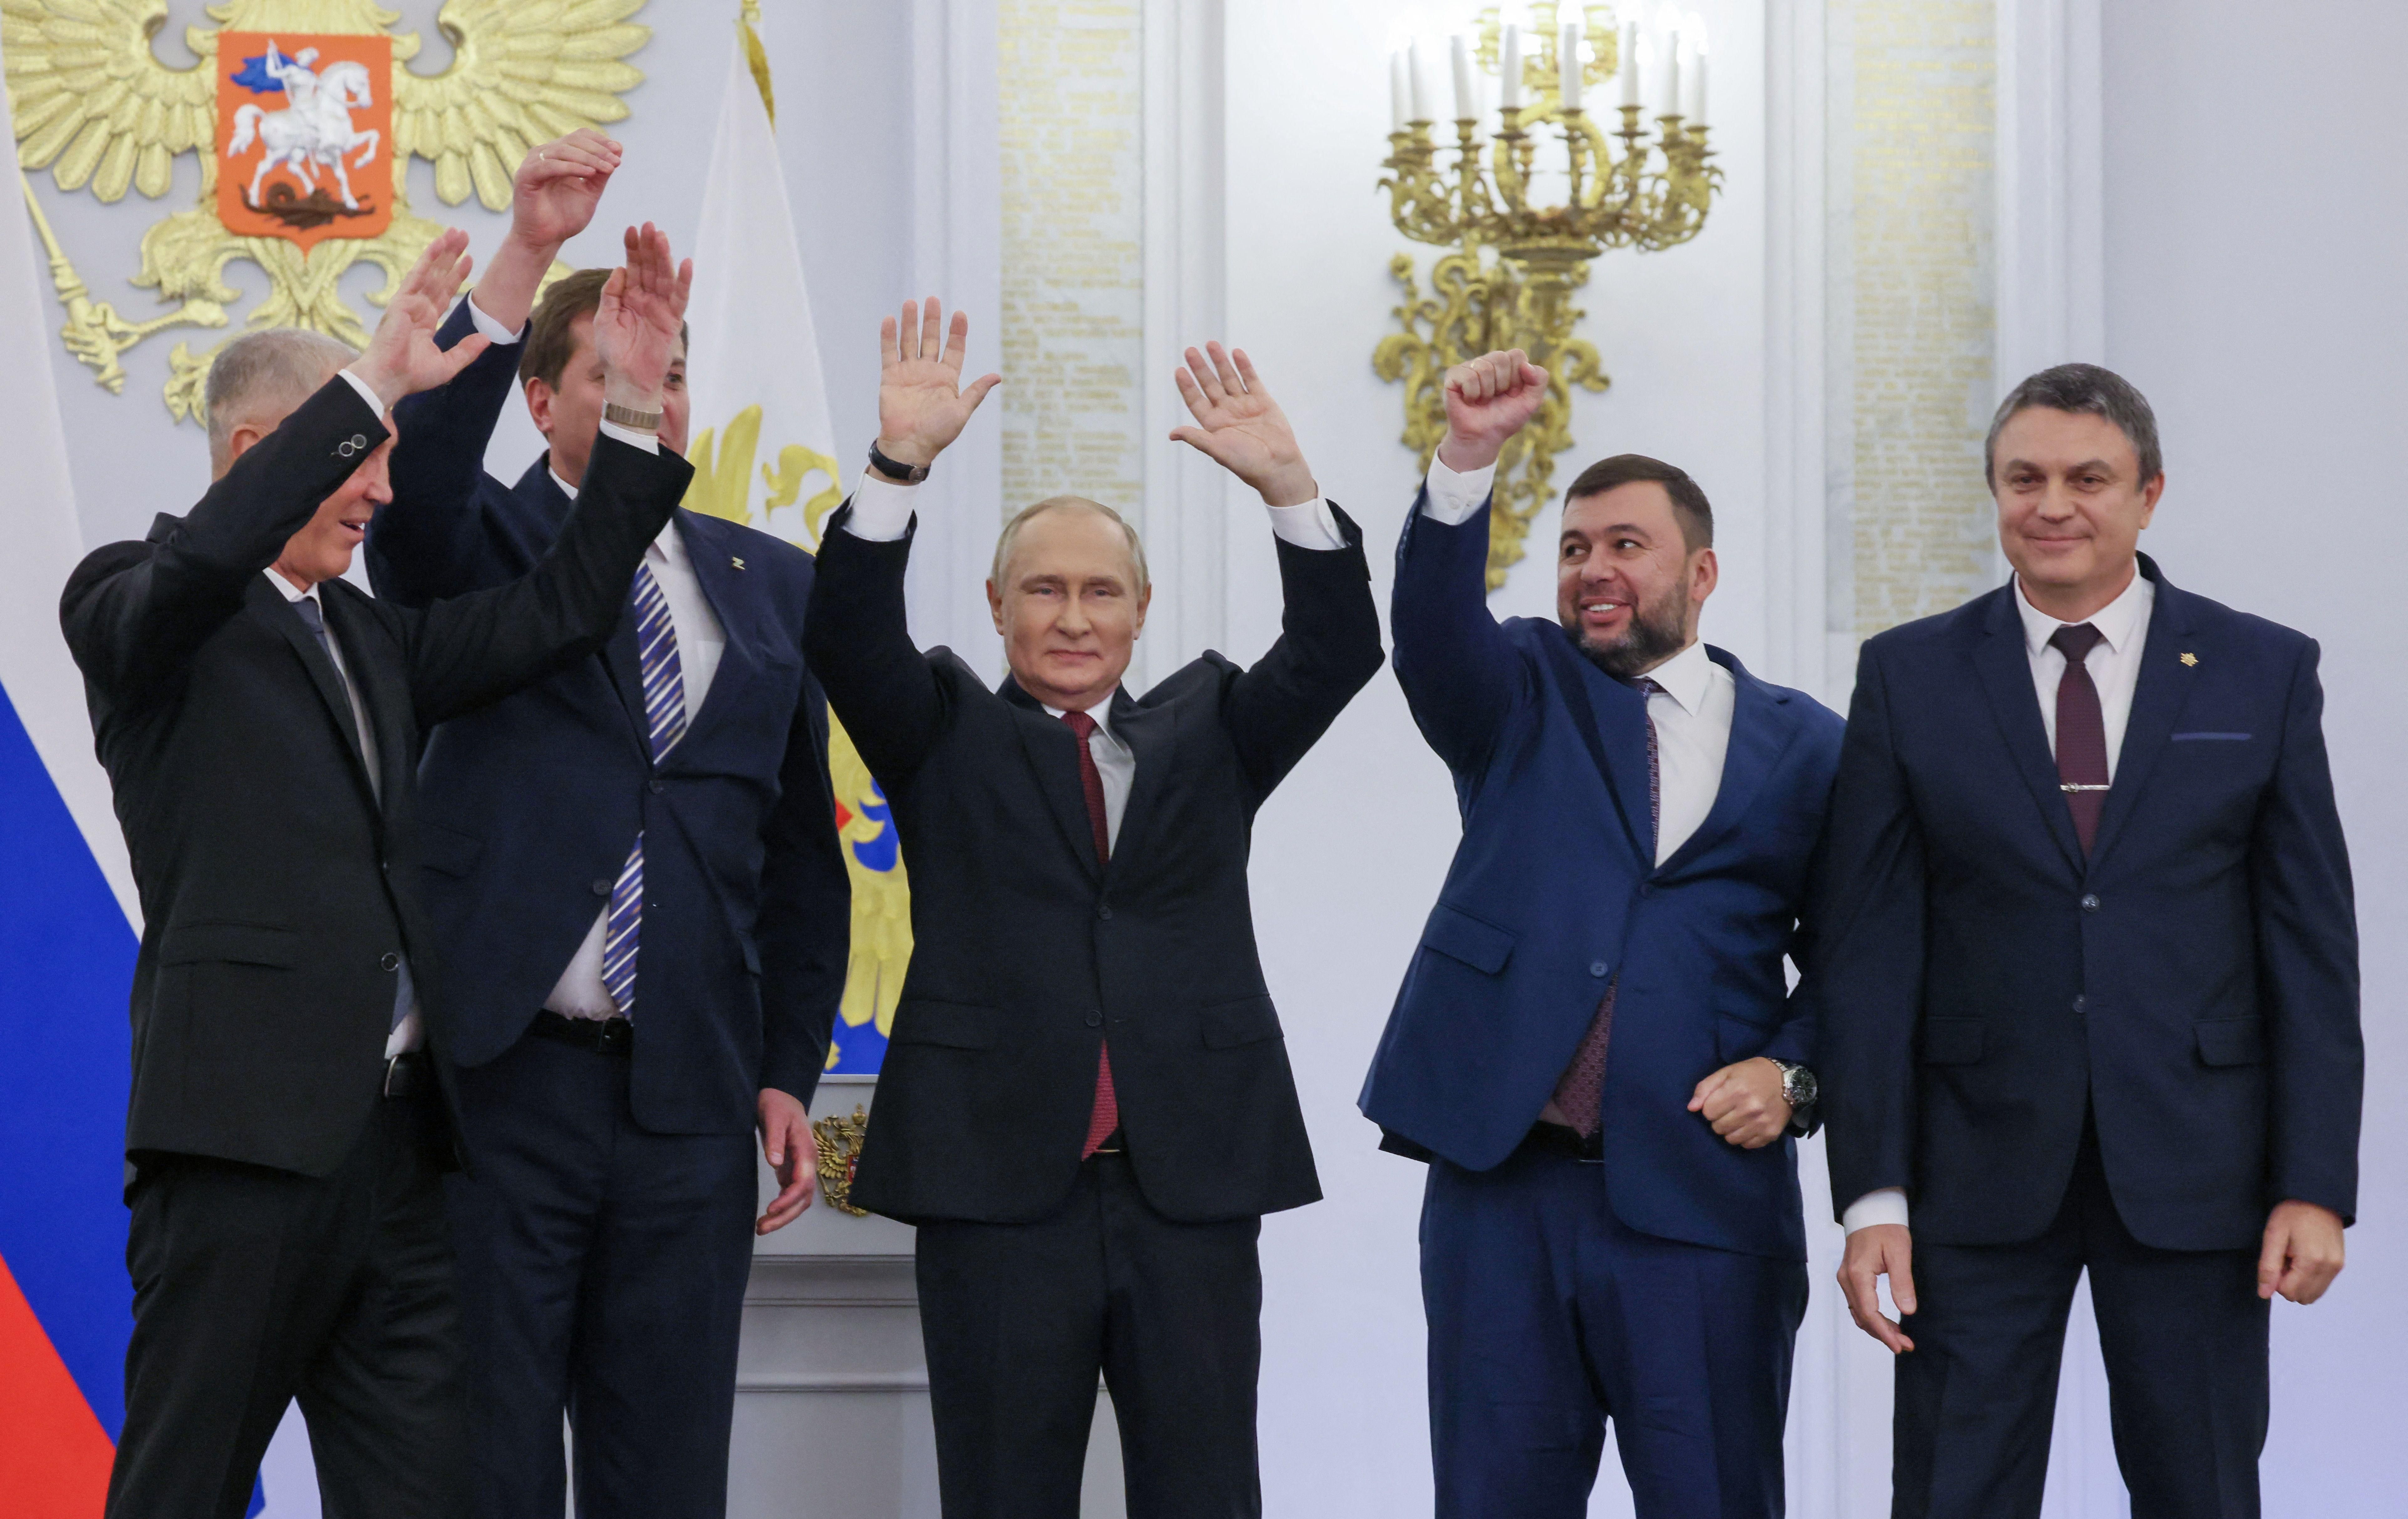 Russian President Vladimir Putin surrounded by other Kremlin officials and leaders of Donbas separatist groups